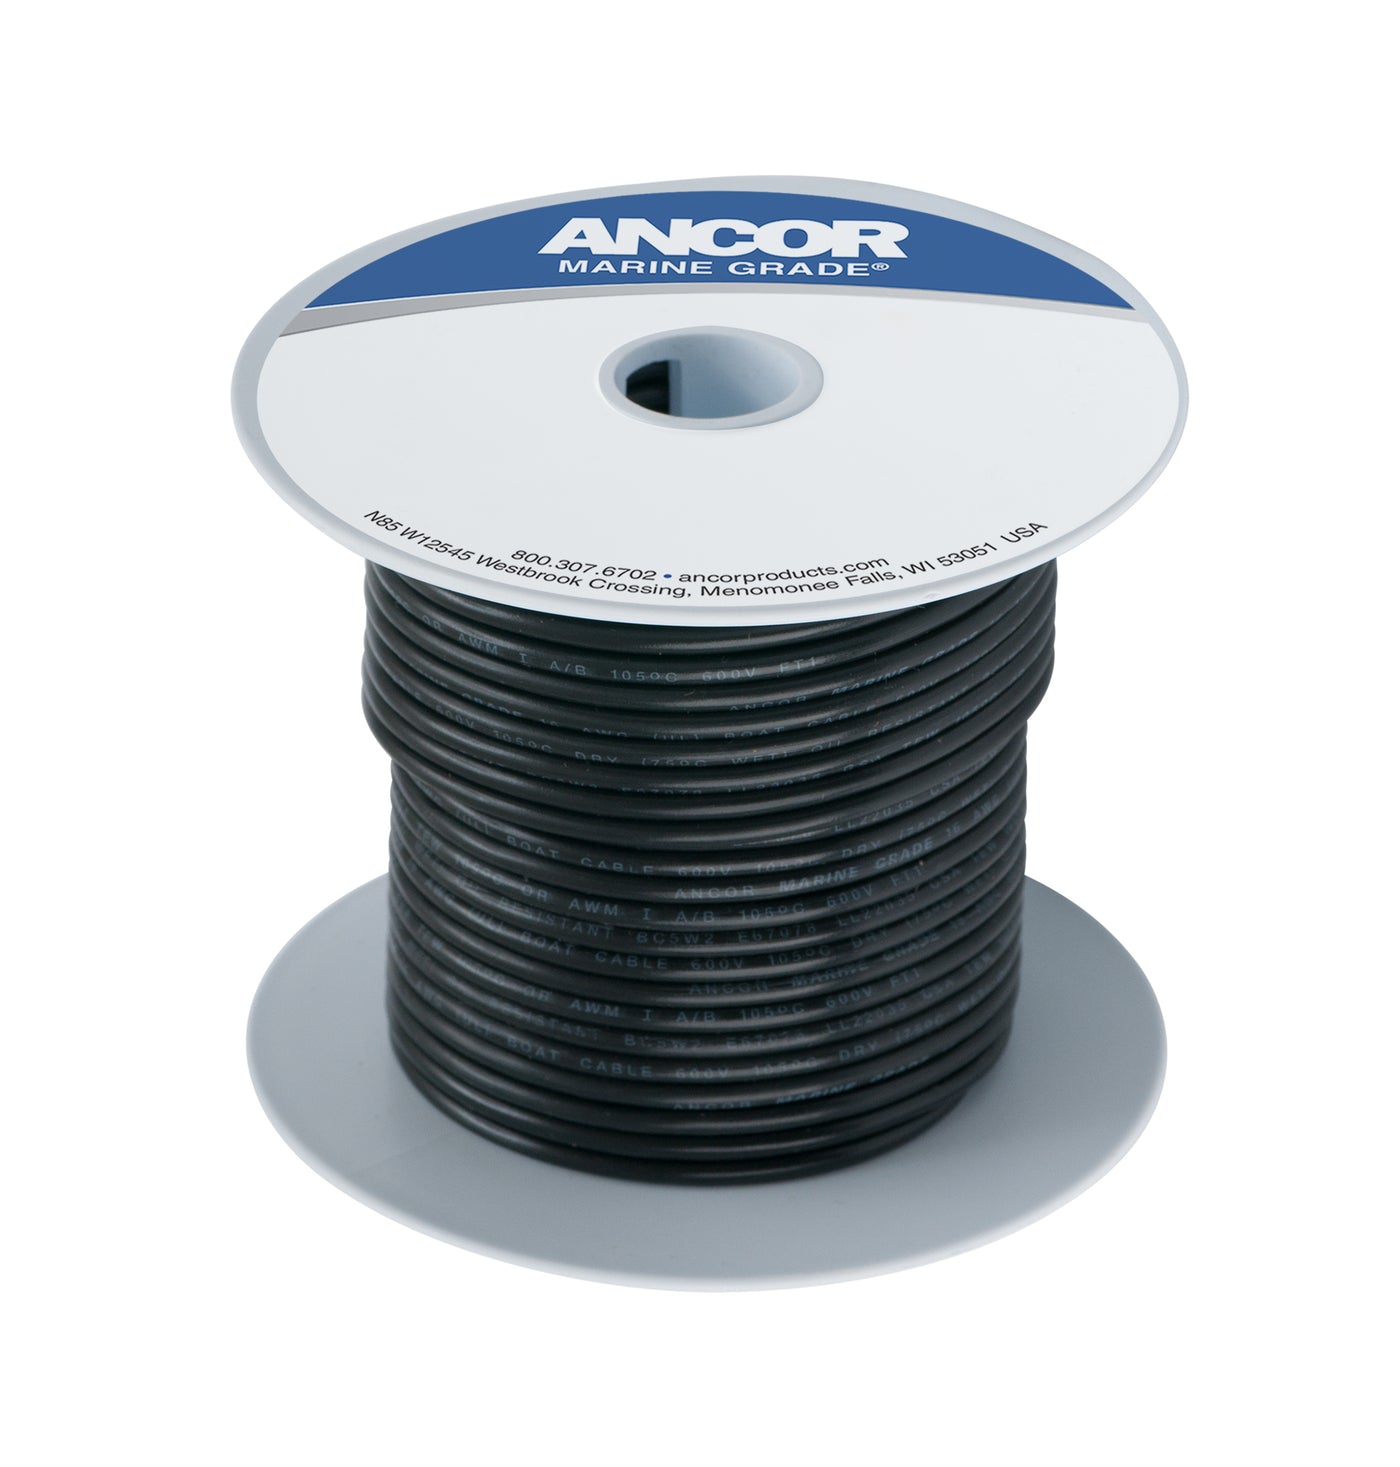 Ancor 112005 Tinned Copper Wire, 6 AWG (13mm²), Black - 50ft